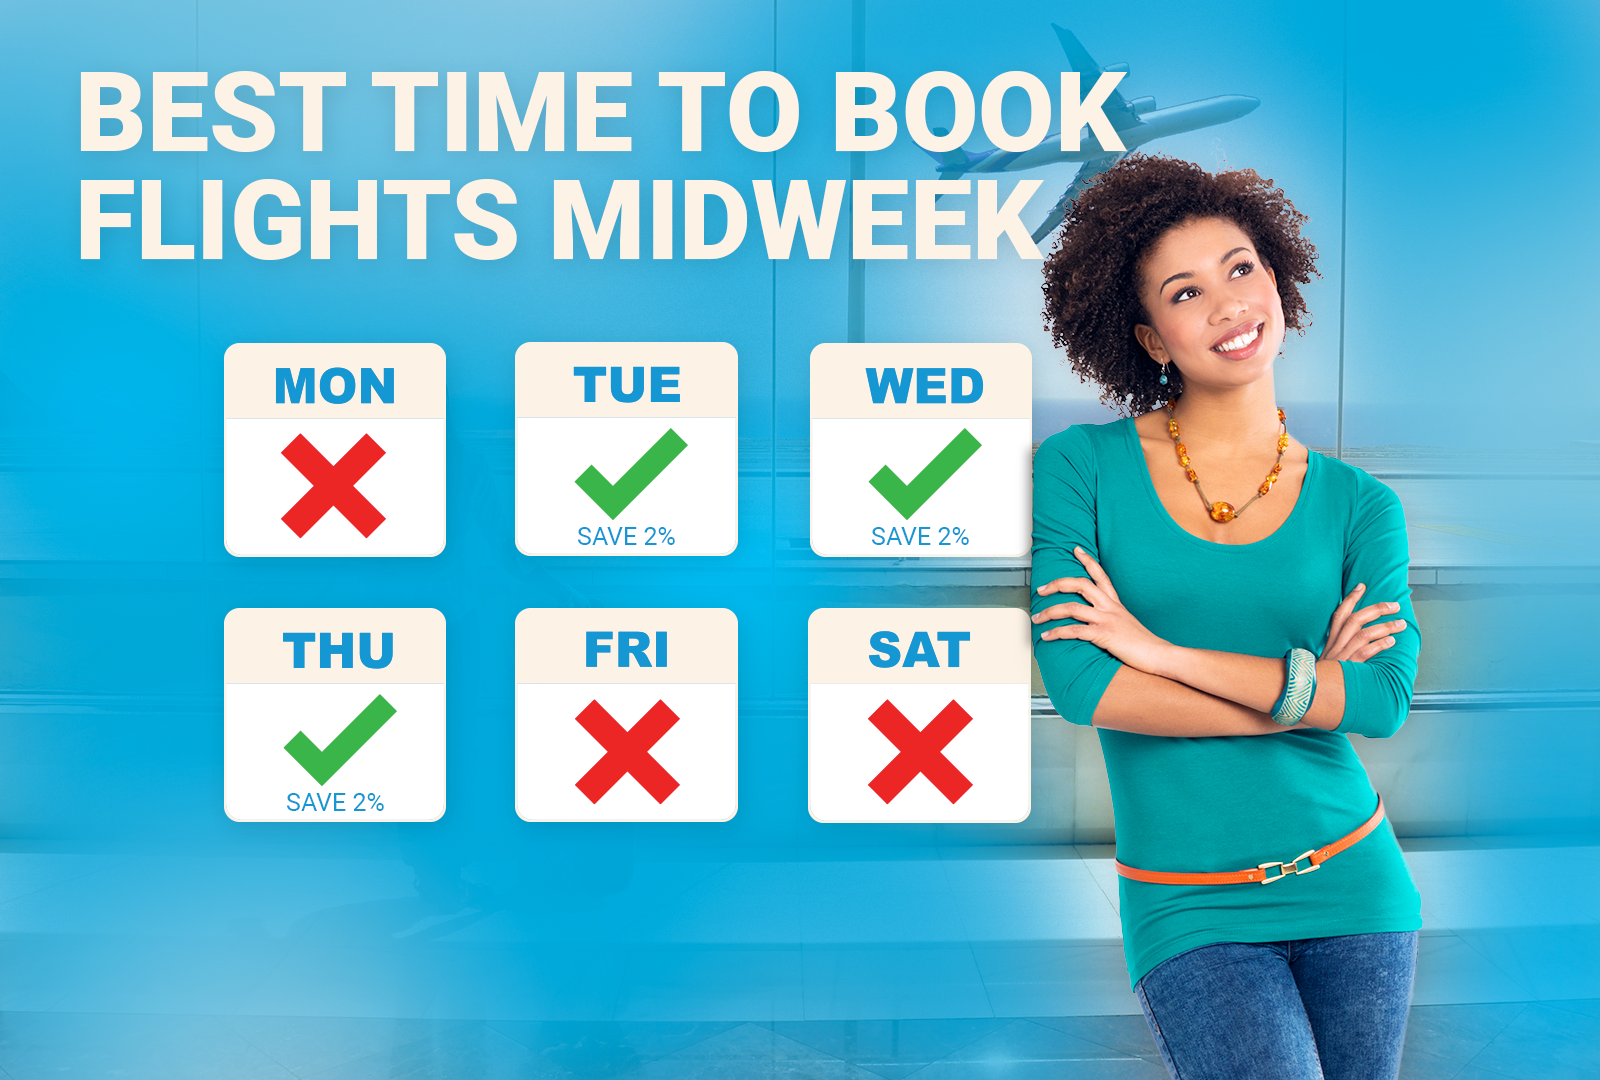 Woman crossing her arms and smiling on a blue background with a calendar of the best time to book flights midweek hovering next to her